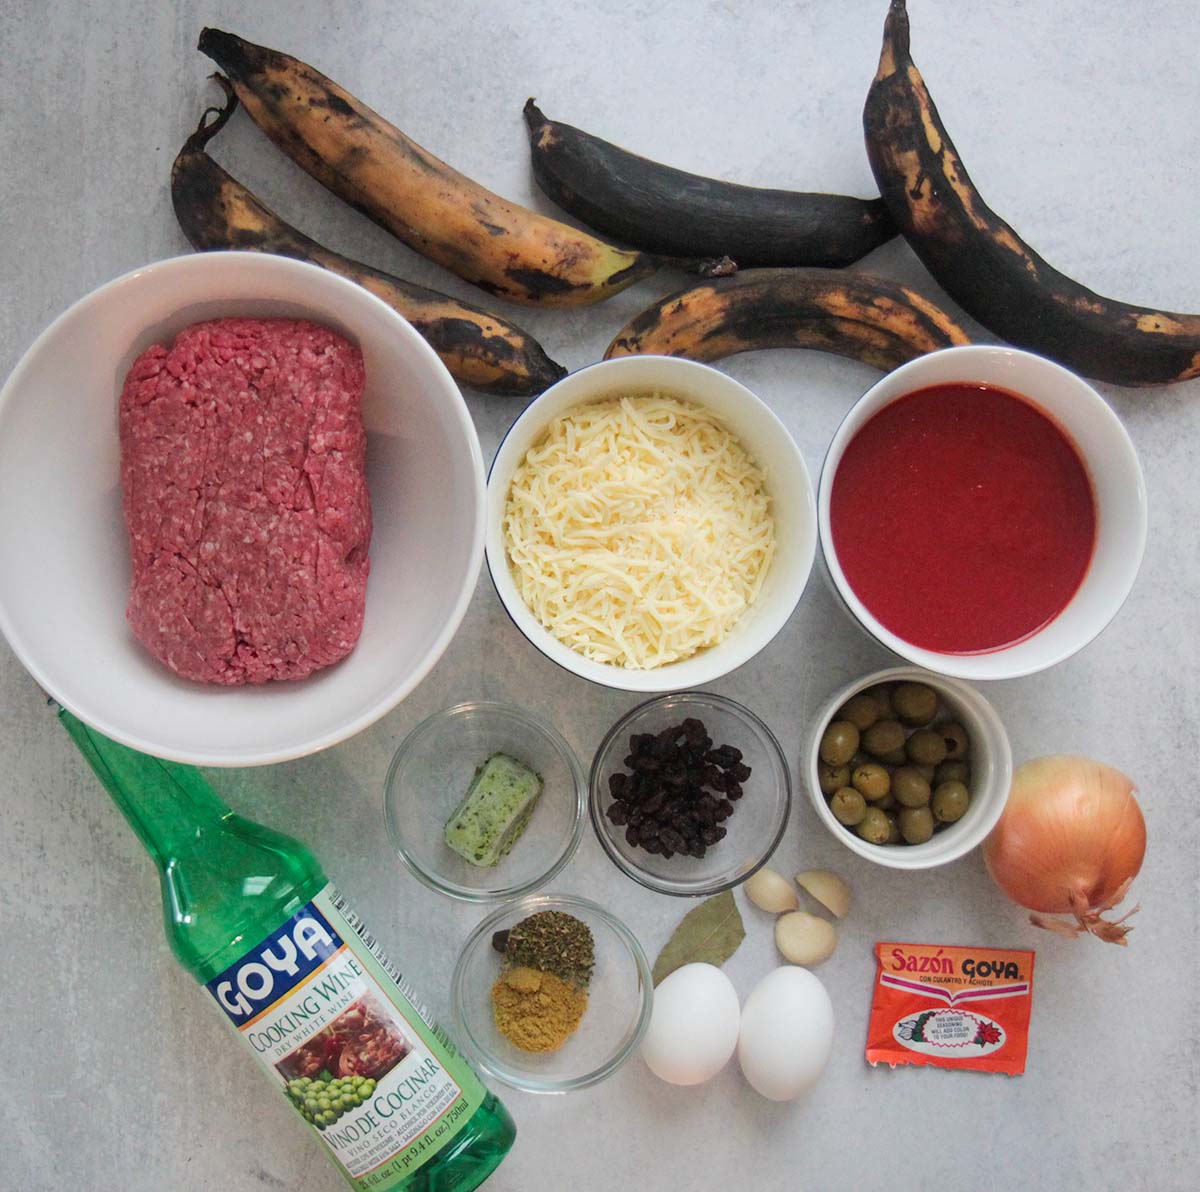 ingredients. platains, beef, cheese, sauce, spices, onion, garlic, sofrito, cooking wine, eggs. 